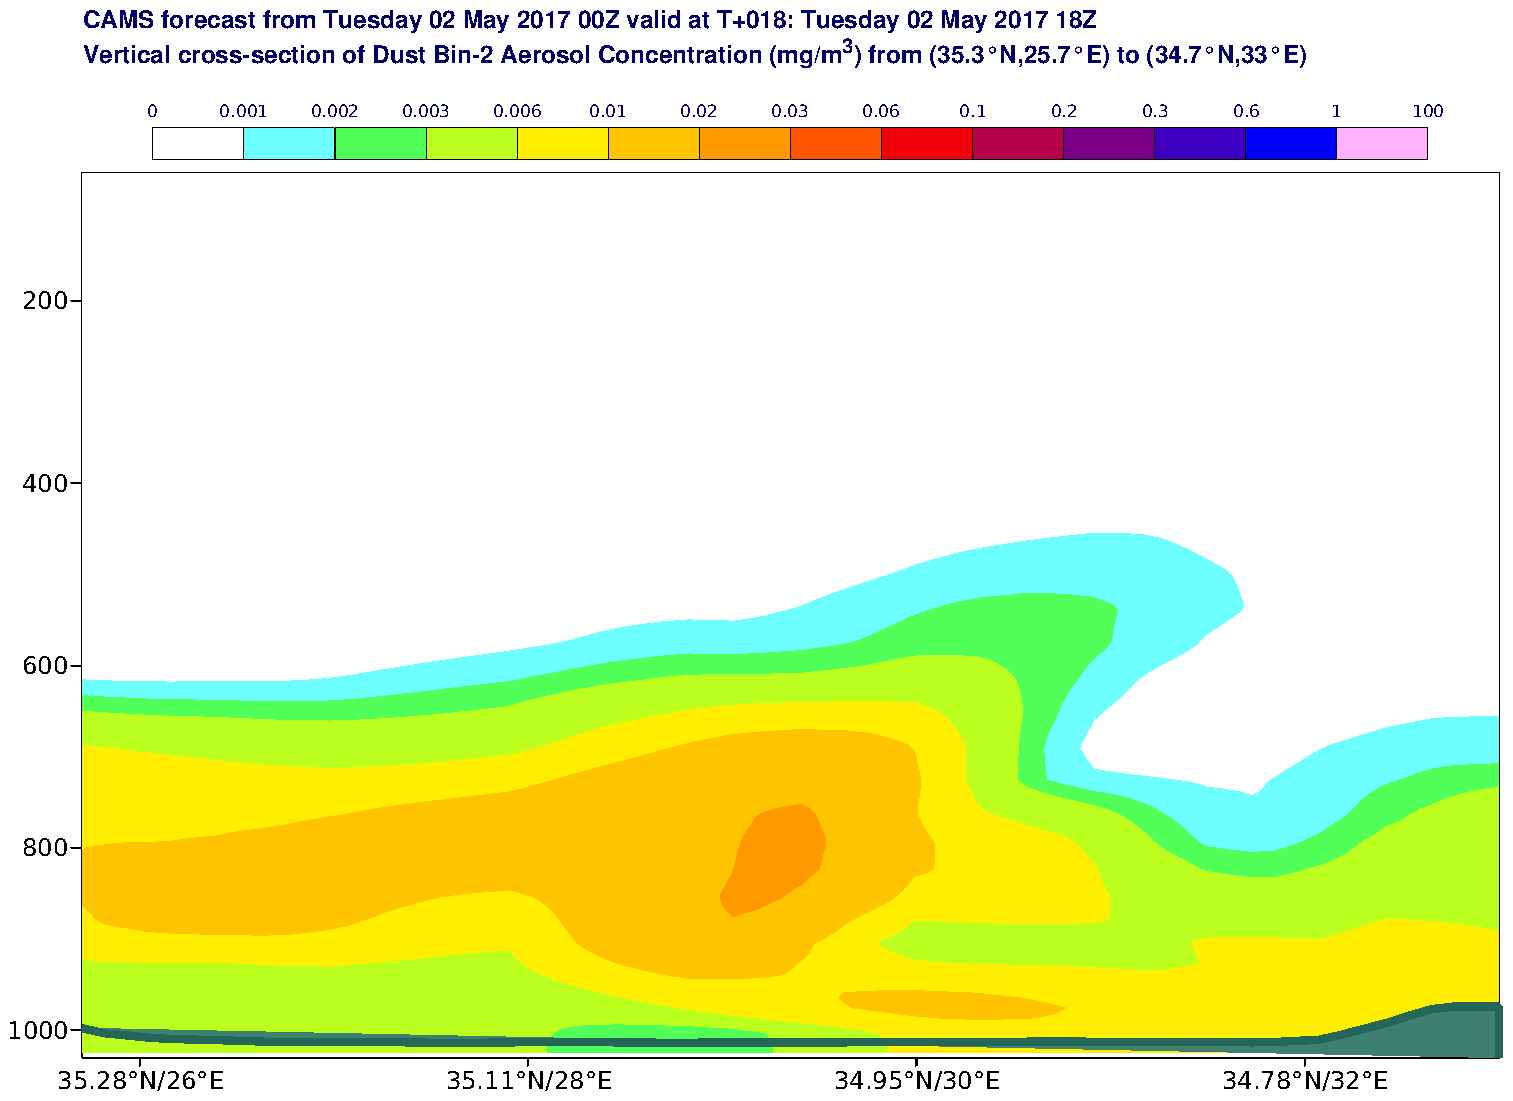 Vertical cross-section of Dust Bin-2 Aerosol Concentration (mg/m3) valid at T18 - 2017-05-02 18:00